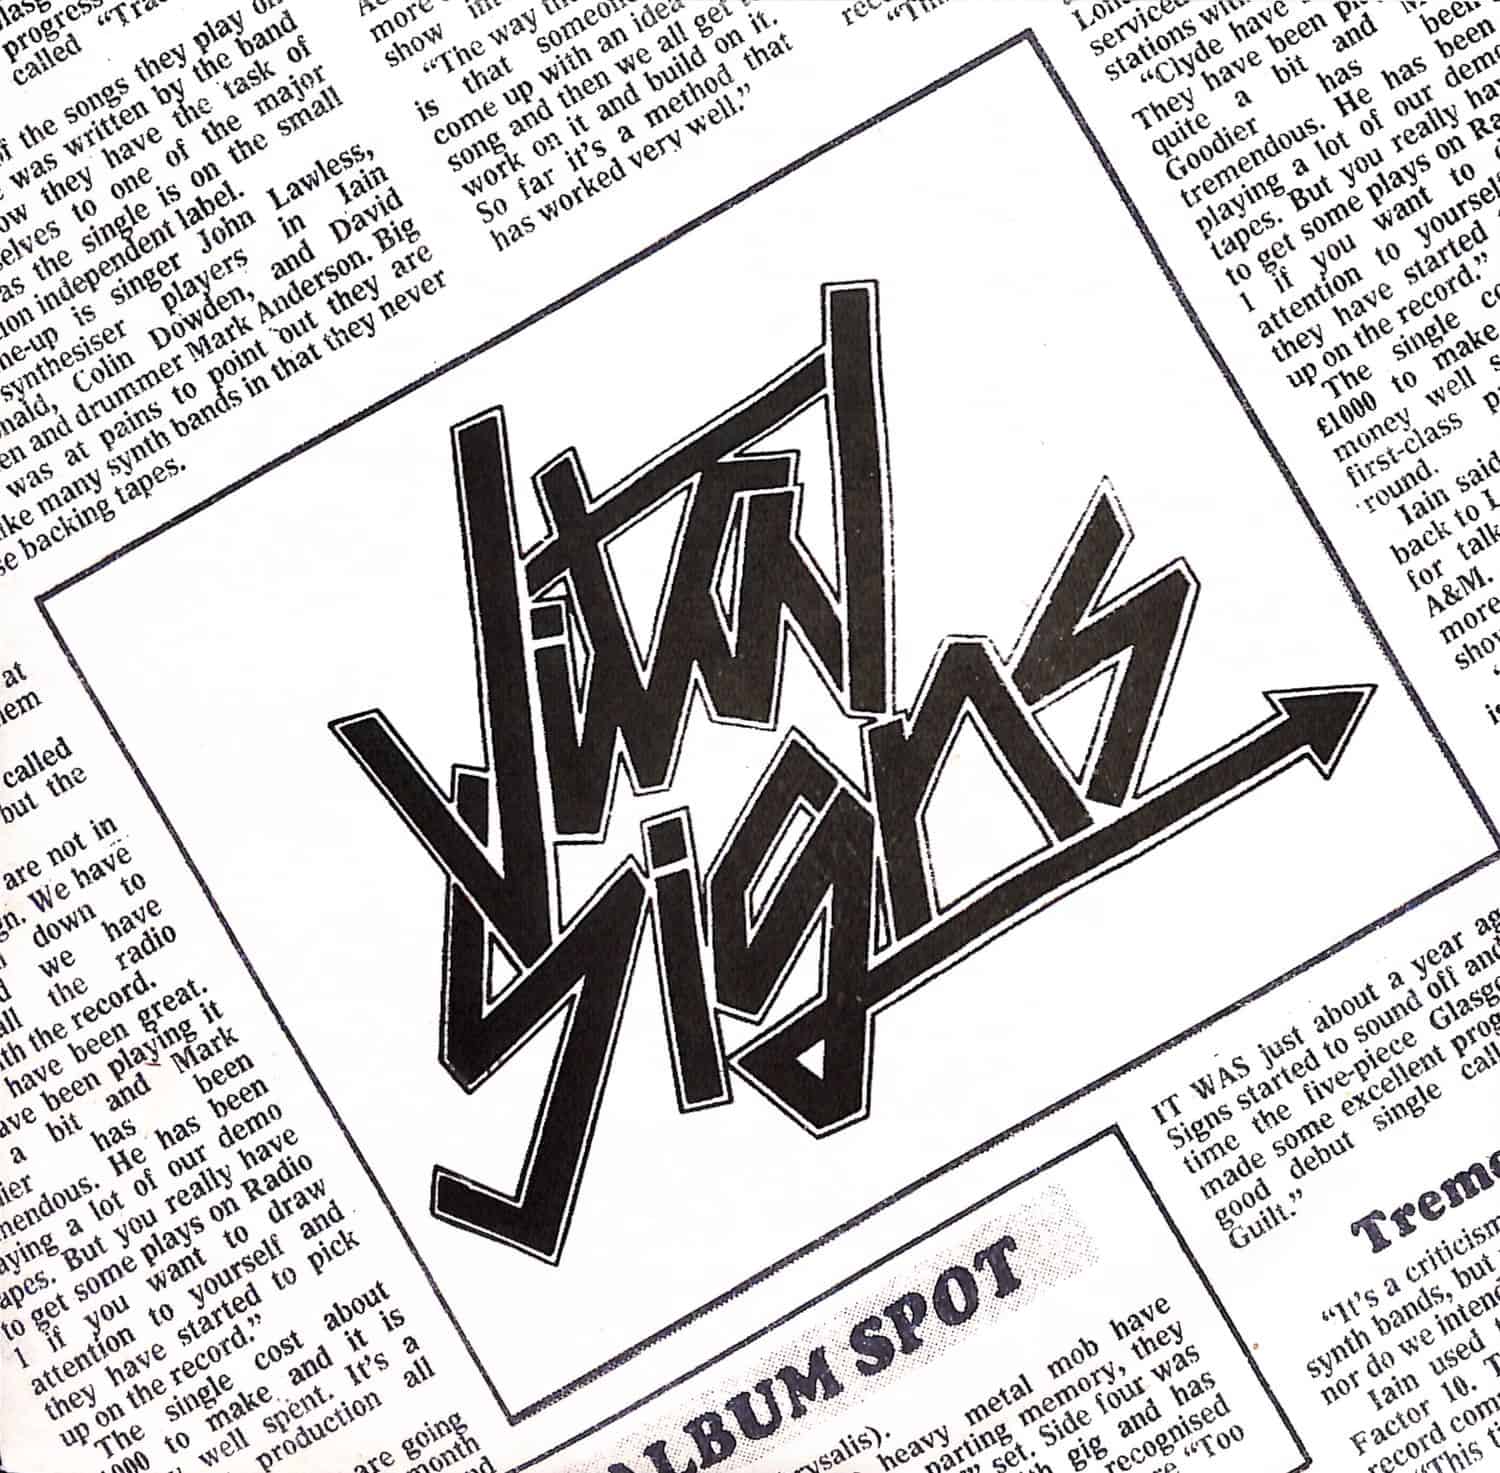 Vital Signs - TRADING IN GUILT 